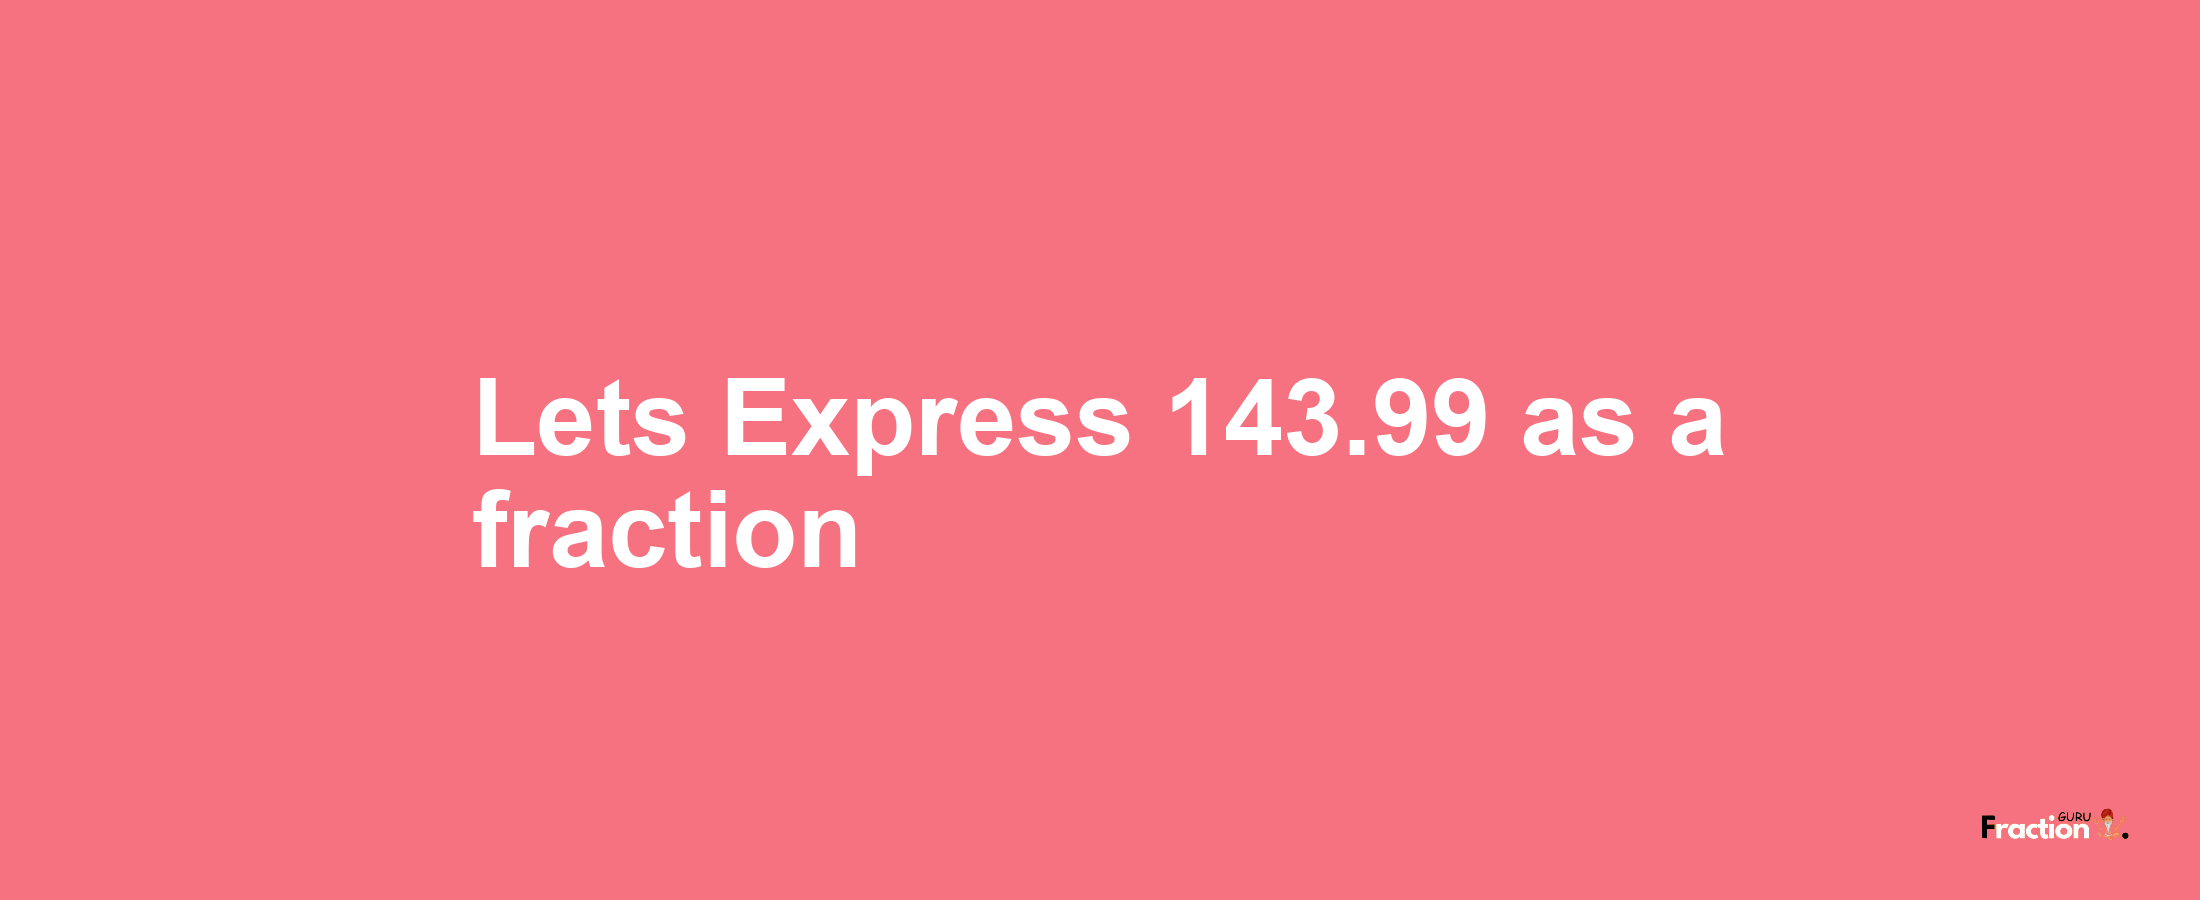 Lets Express 143.99 as afraction